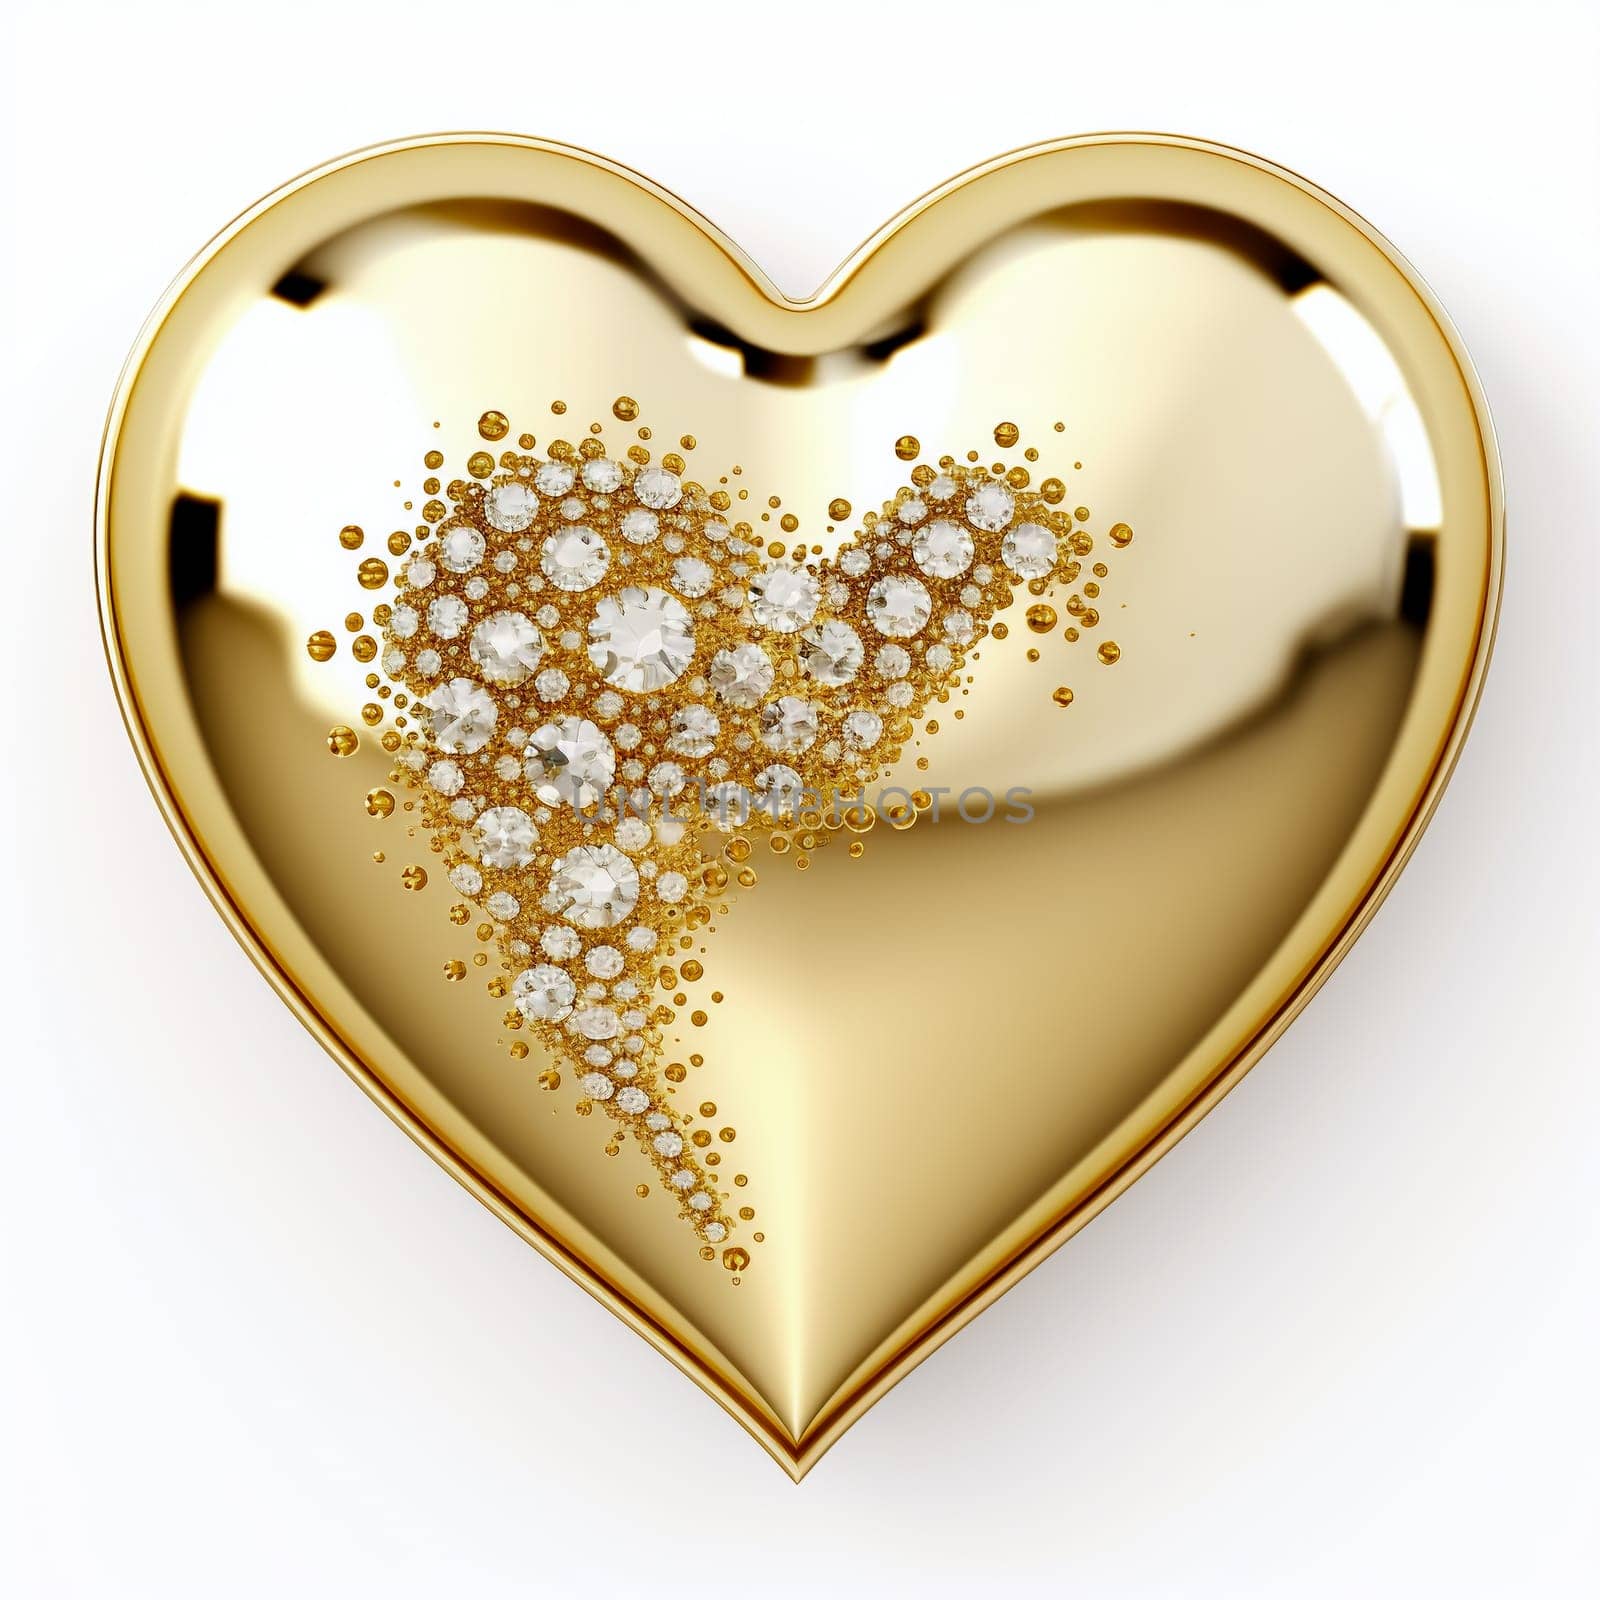 golden heart encrusted with glittering diamonds, evoking feelings of love and the luxury of romance by chrisroll